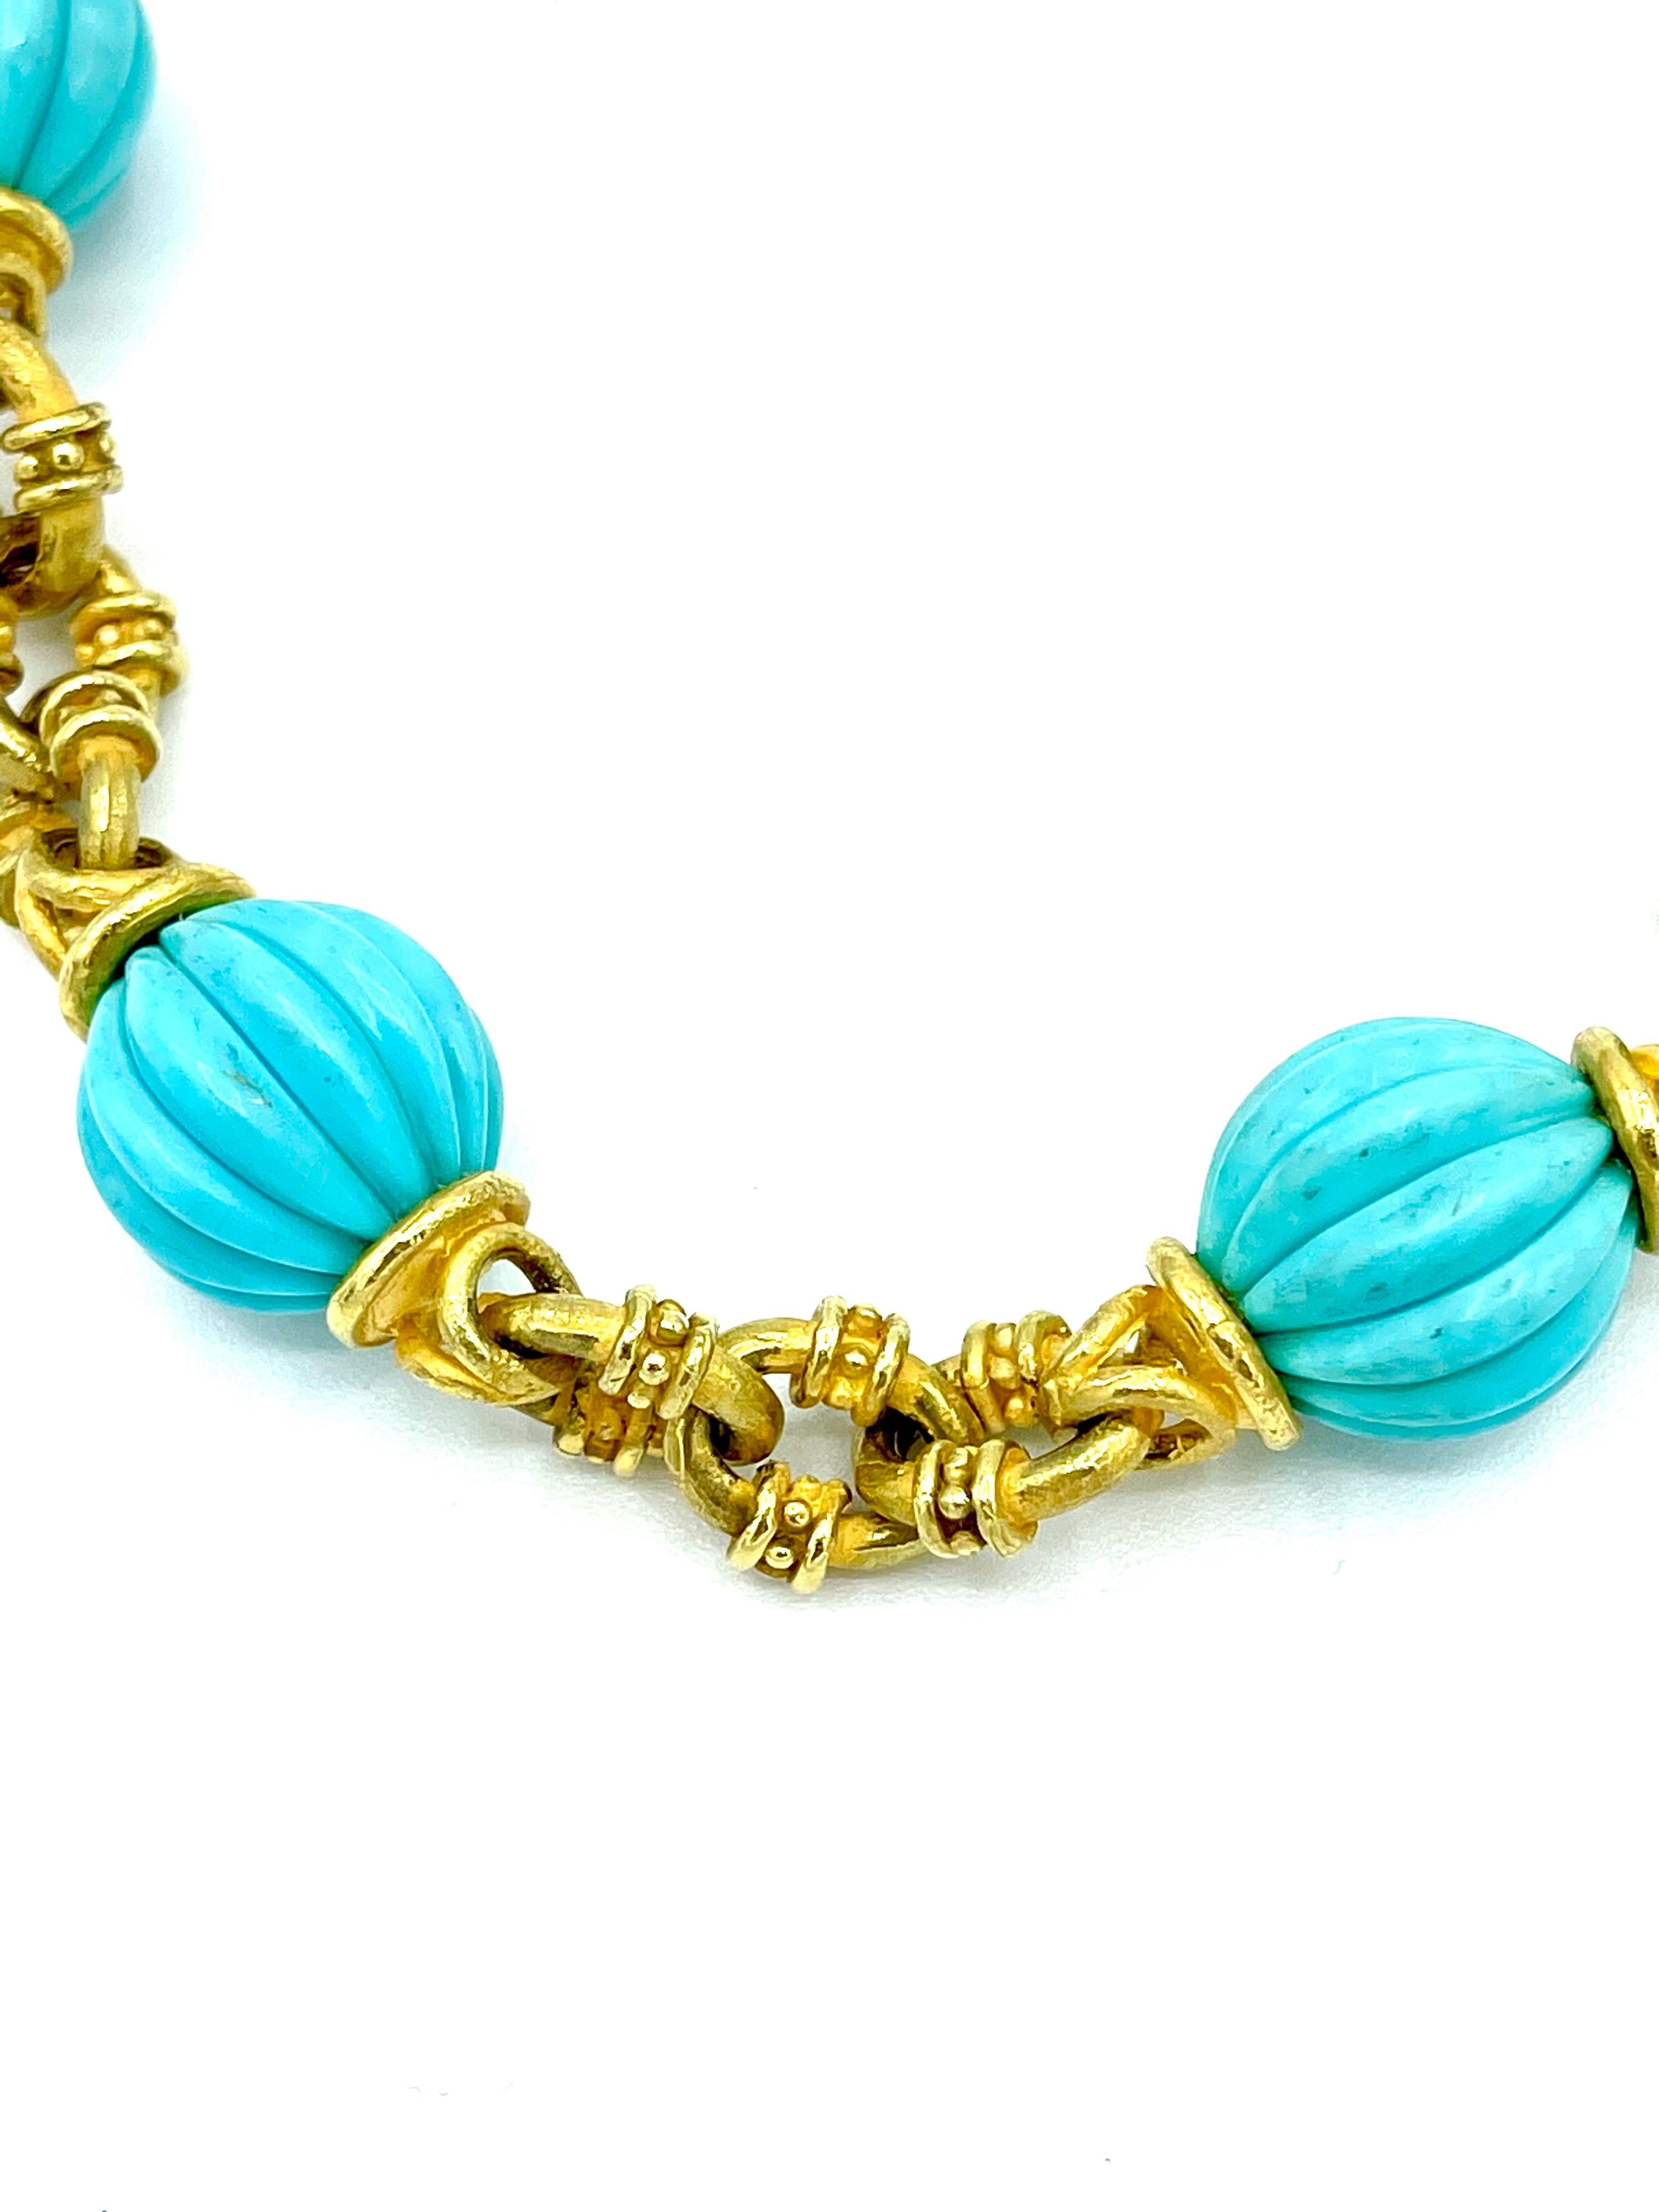 The perfect necklace to wear all the time!  This 25.00 inch necklace features 14.70mm carved ribbed turquoise beads with a beautifully handcrafted matte finish 18K yellow god link.  There are 12 turquoise beads throughout with three links between